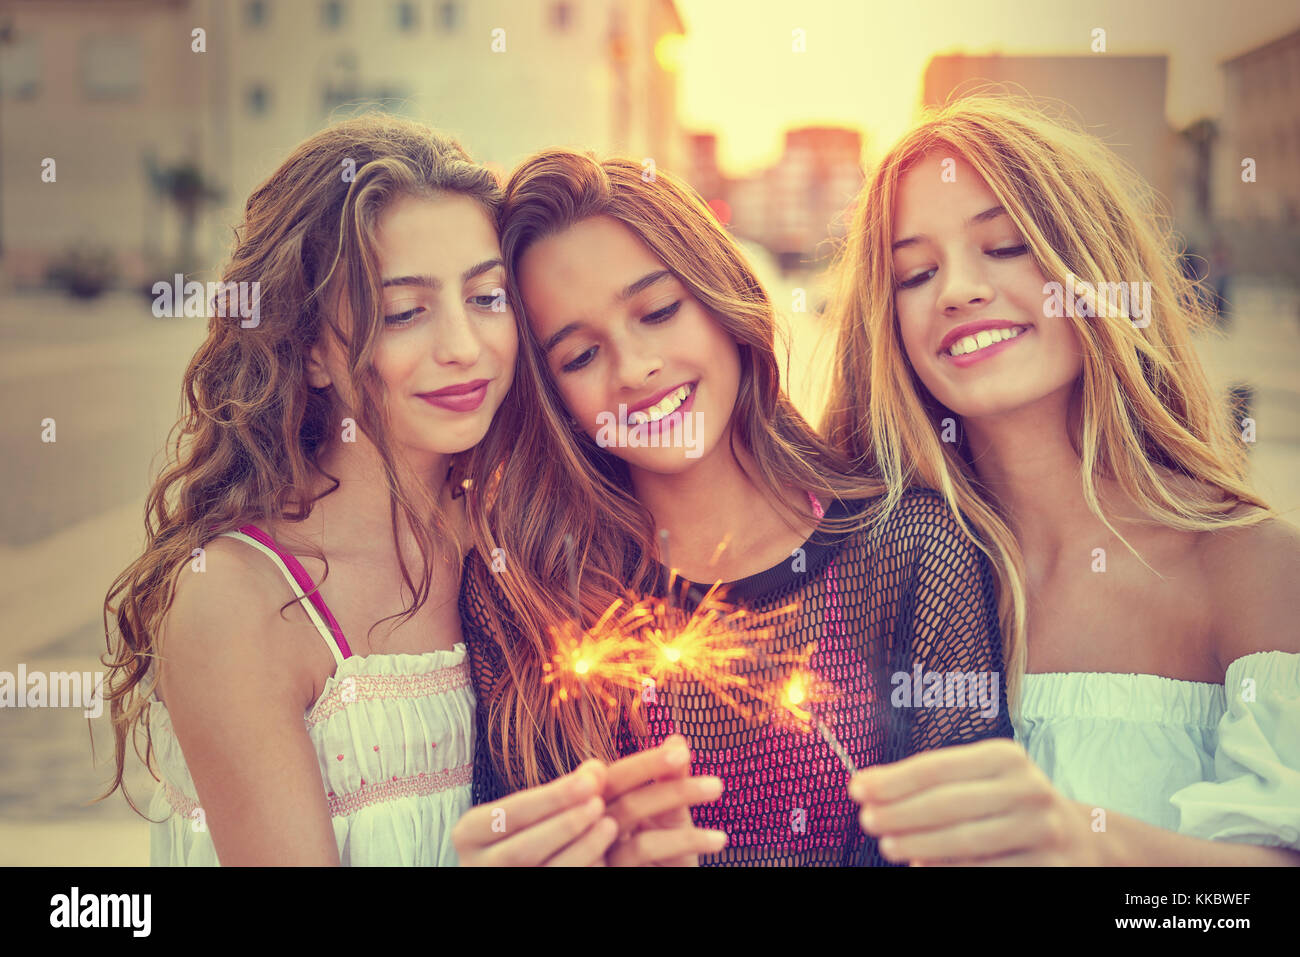 Best friends teen girls with sparklers at sunset in the city filtered image Stock Photo